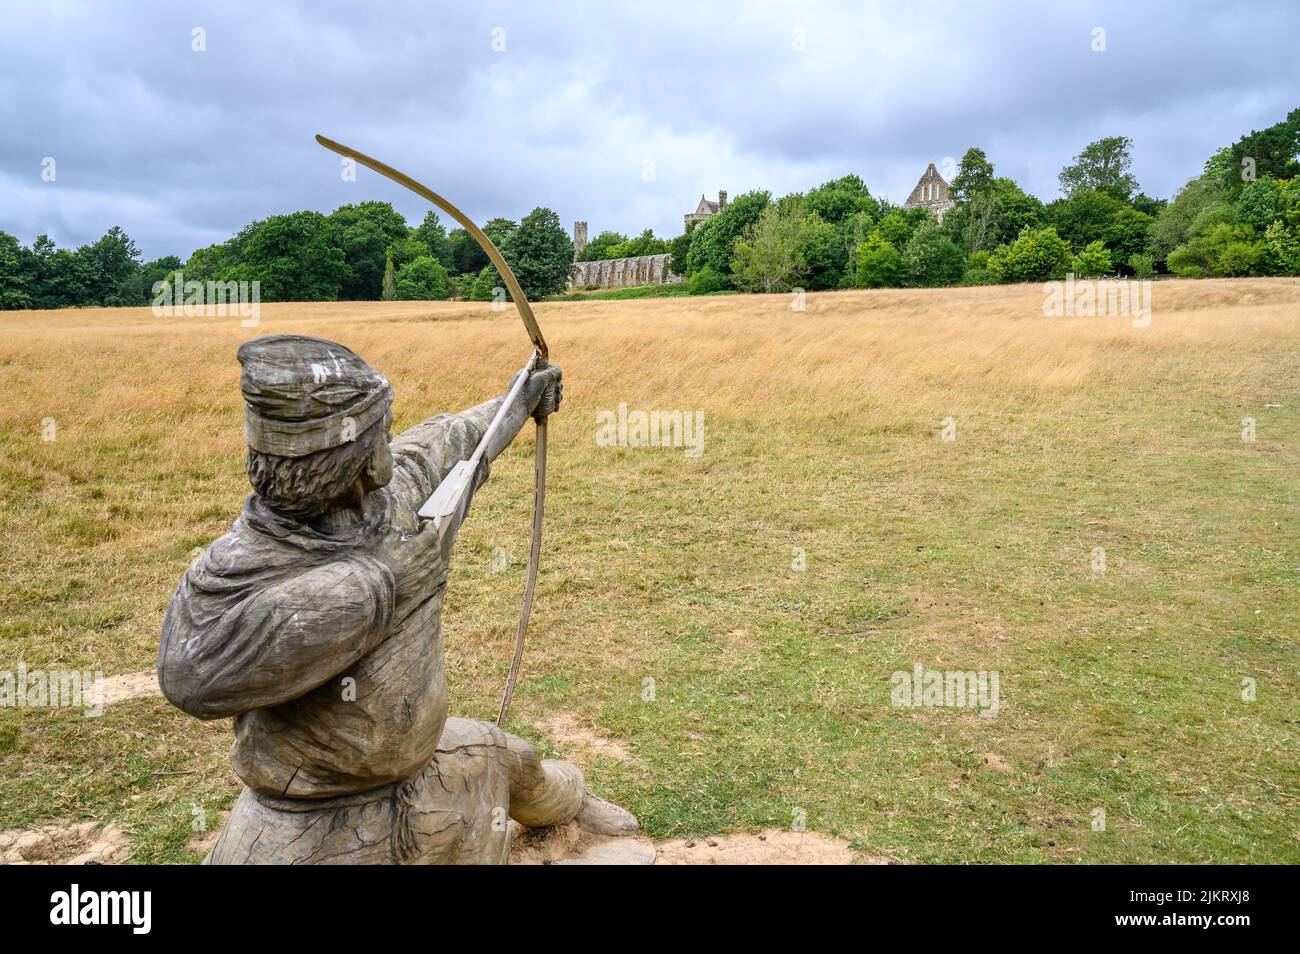 View over the battlefield at the Battle of Hastings in 1066 with a wood sculpture of a Norman warrior, Battle, East Sussex, England. Stock Photo